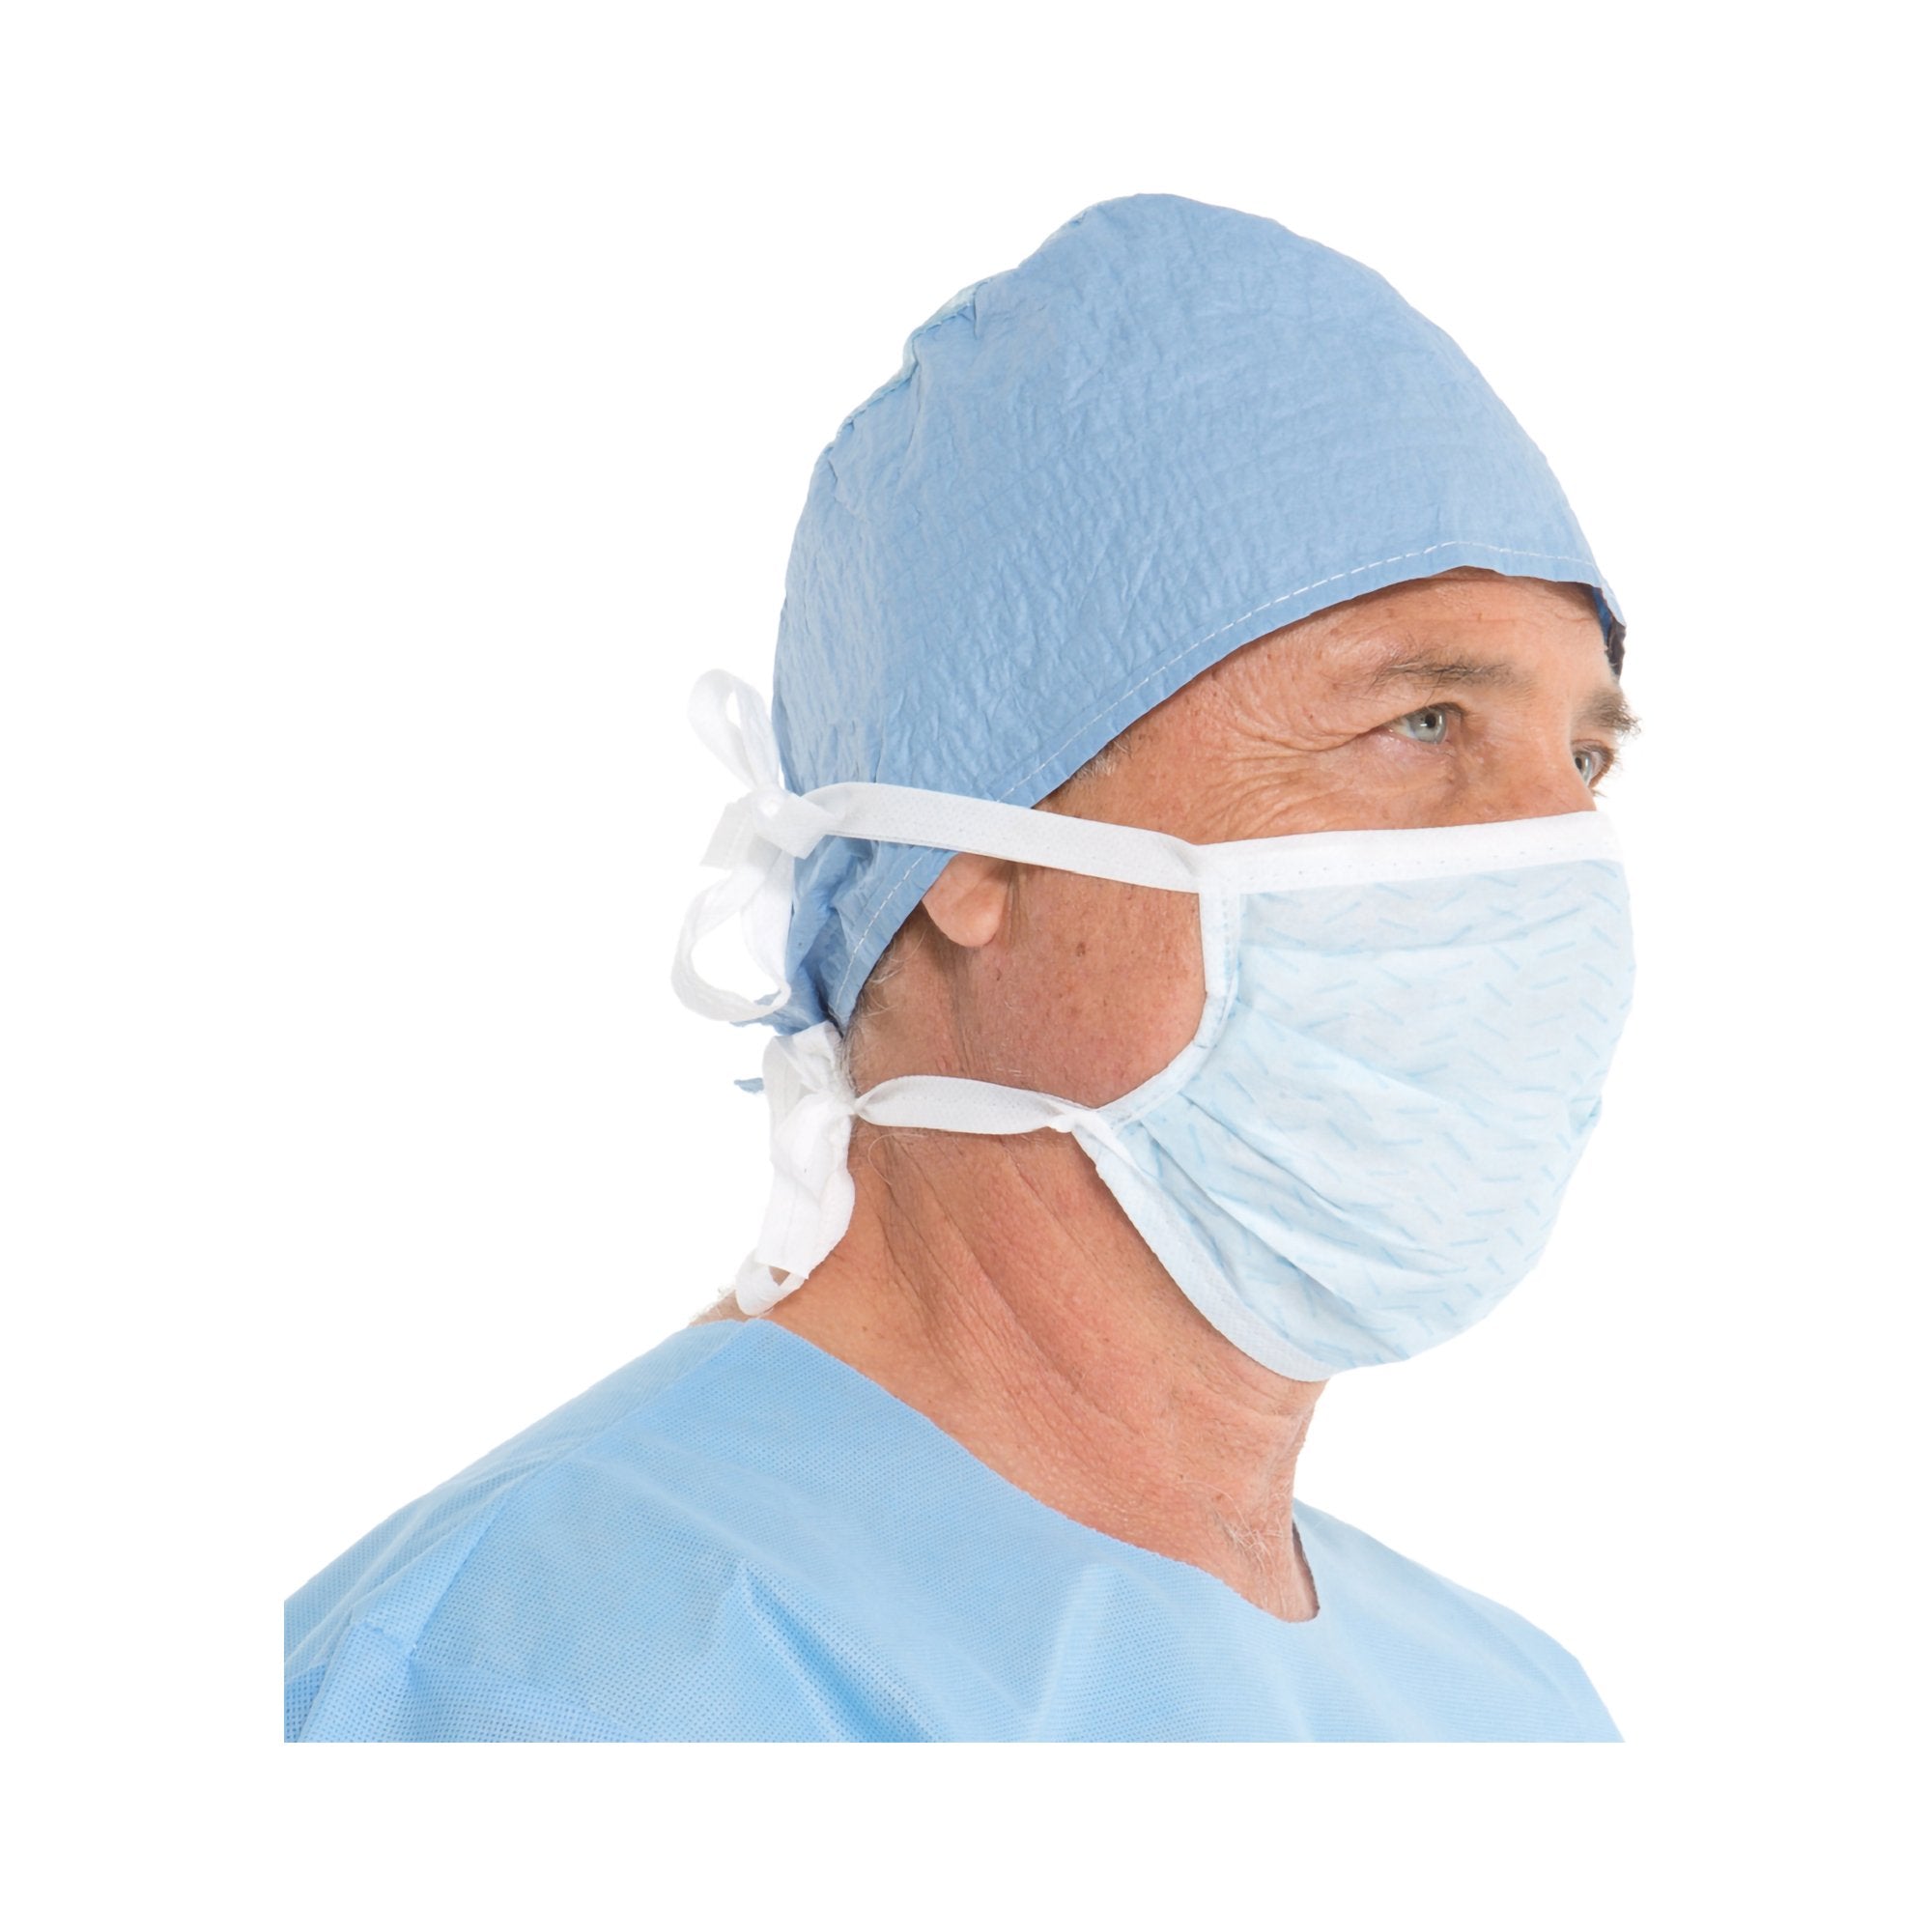 Surgical Mask Soft Touch II Pleated Tie Closure One Size Fits Most Blue NonSterile Not Rated Adult